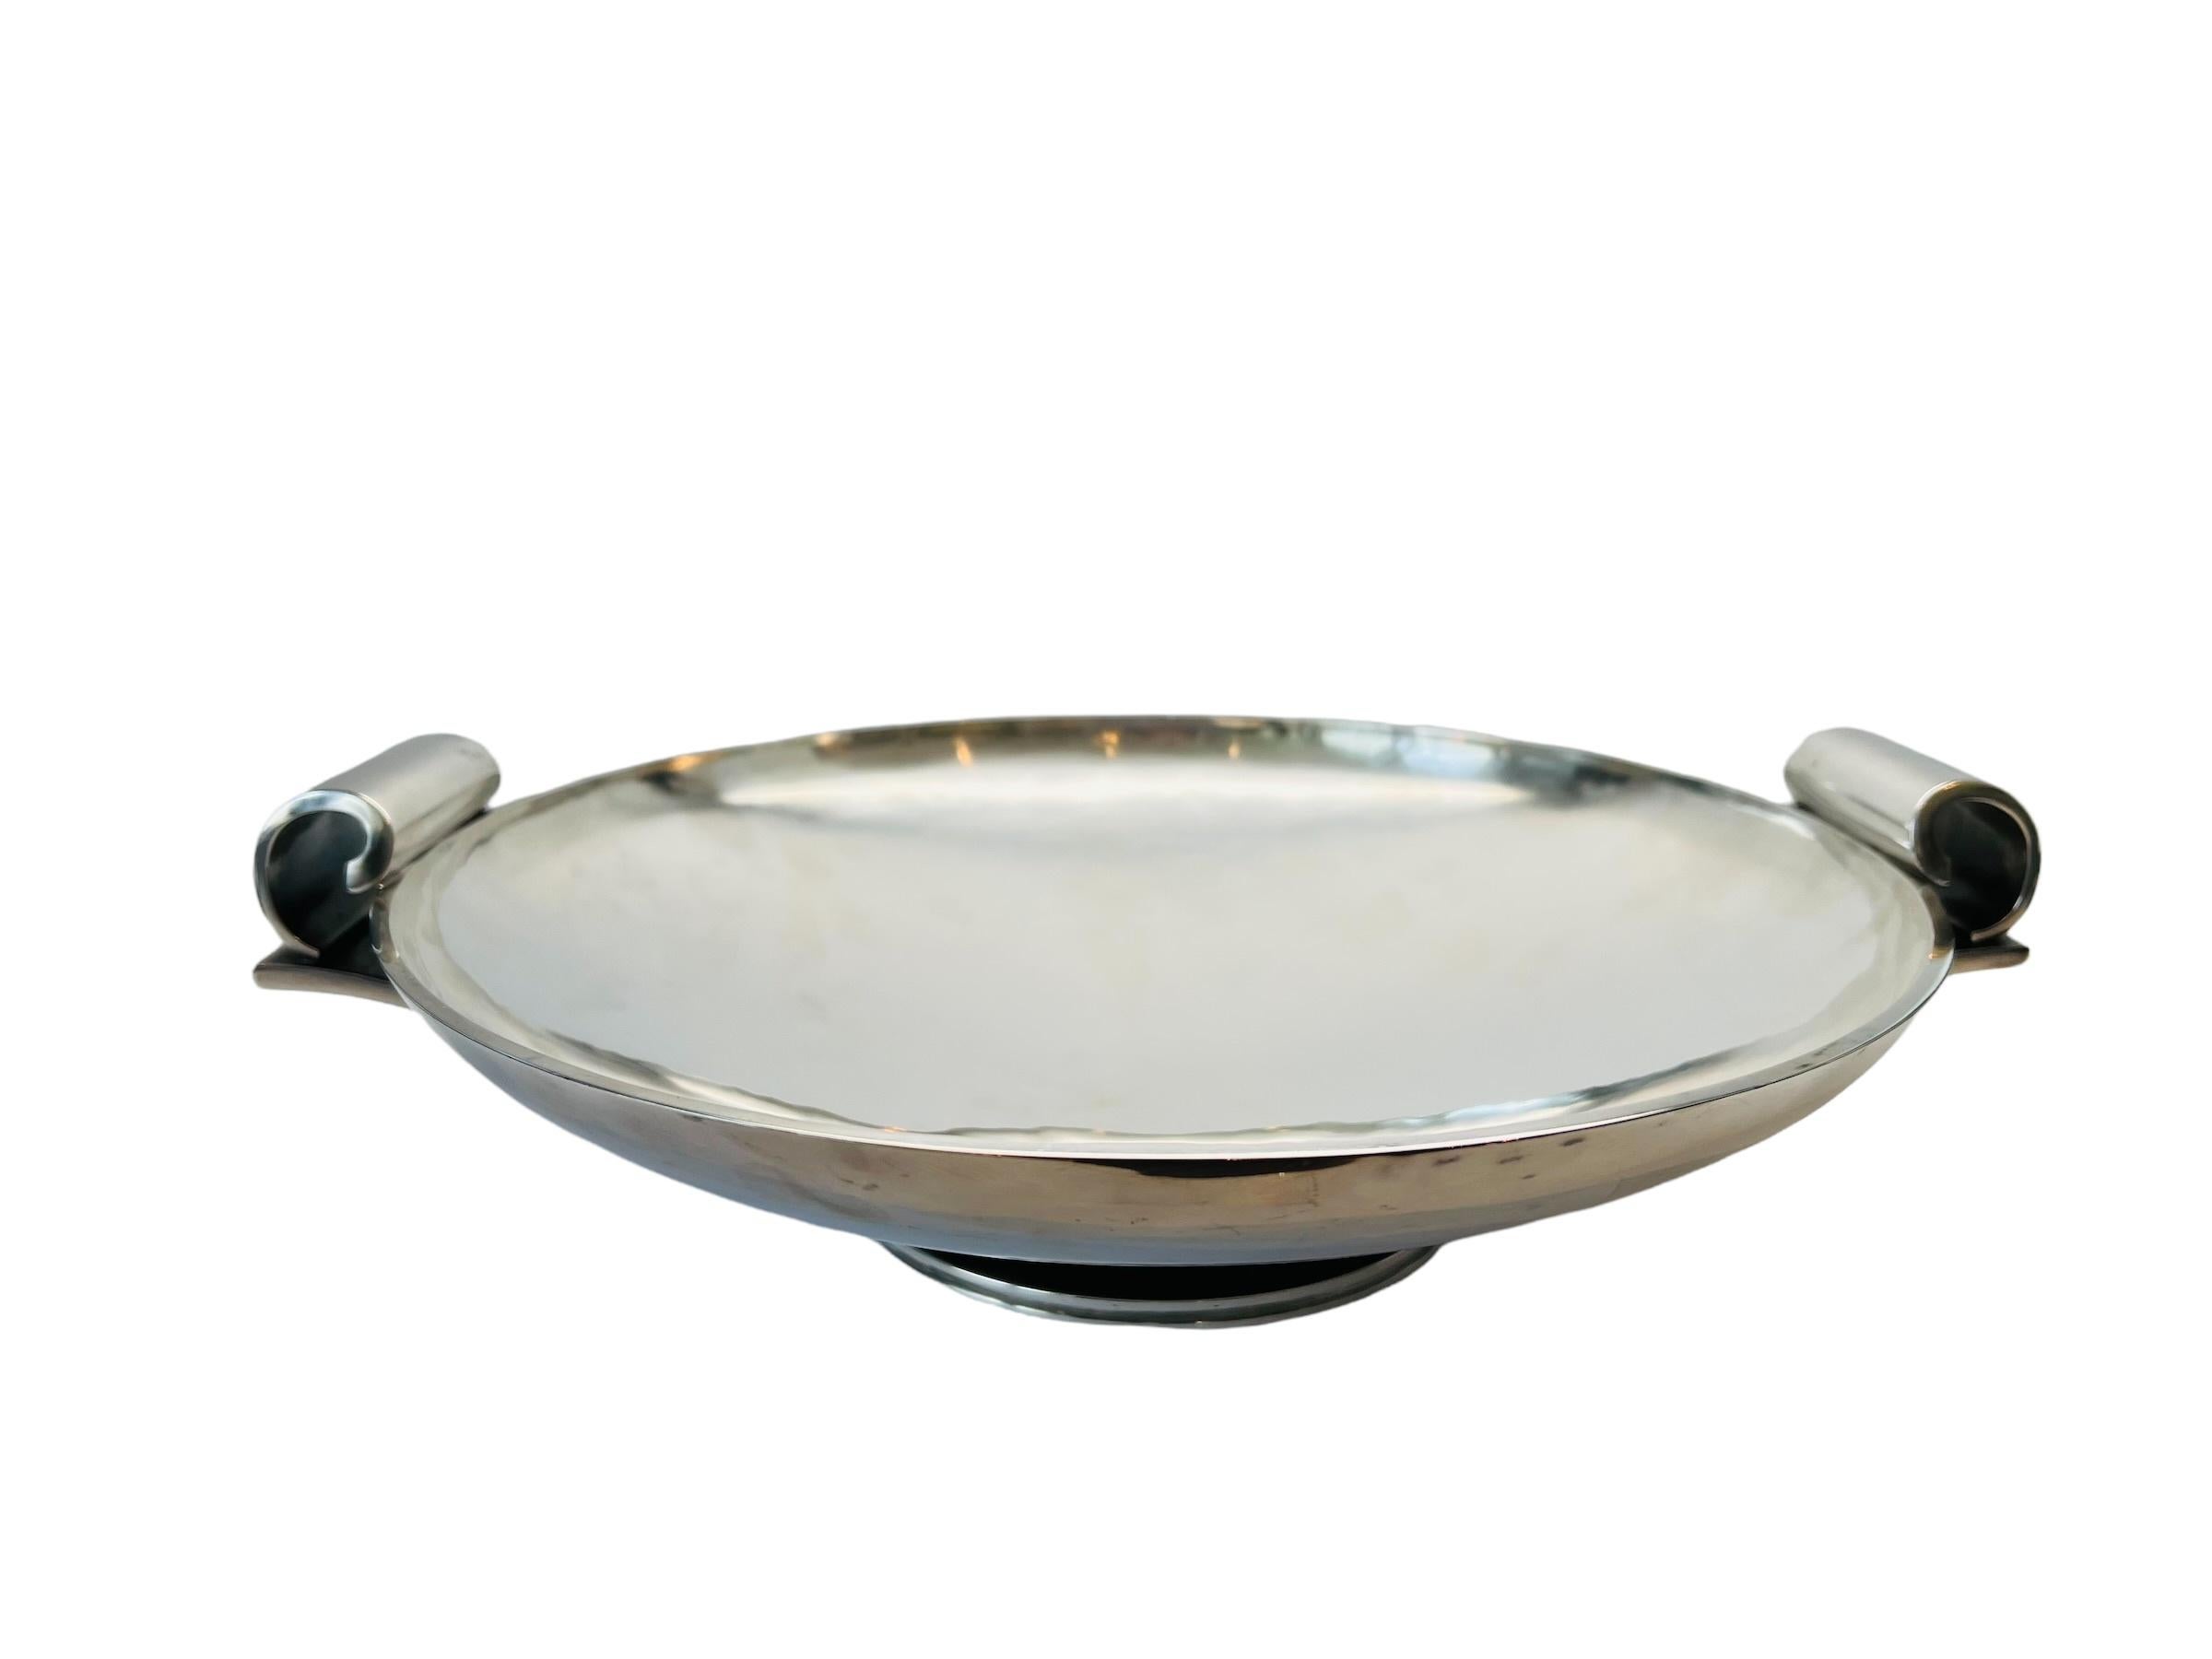 Georg Jensen Denmark sterling silver Art Deco rolled handle centerpiece bowl by Harald Nielsen 752B.

Marked: Georg Jensen in dotted oval dating 1945 to present, Denmark, Sterling, 752B, Dessin HN

Bowl measures 13 7/8